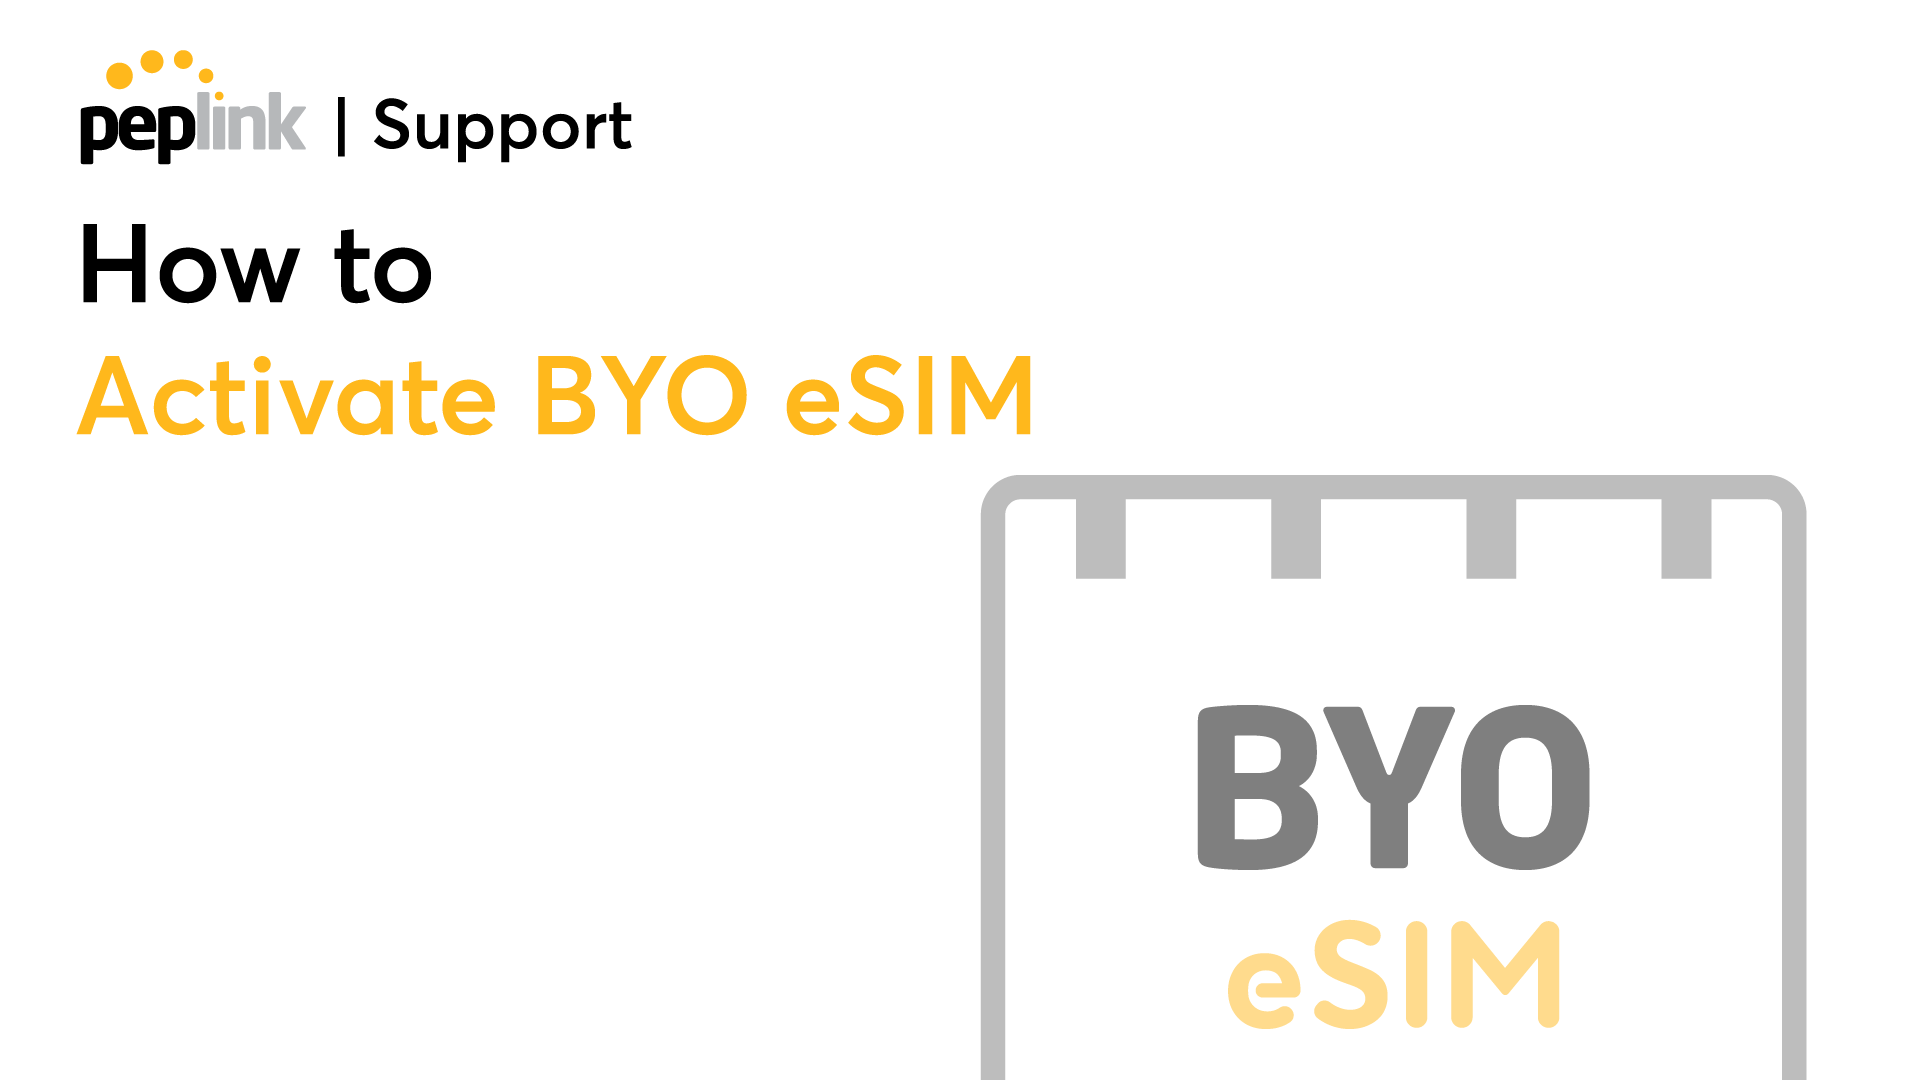 How to Activate BYO eSIM